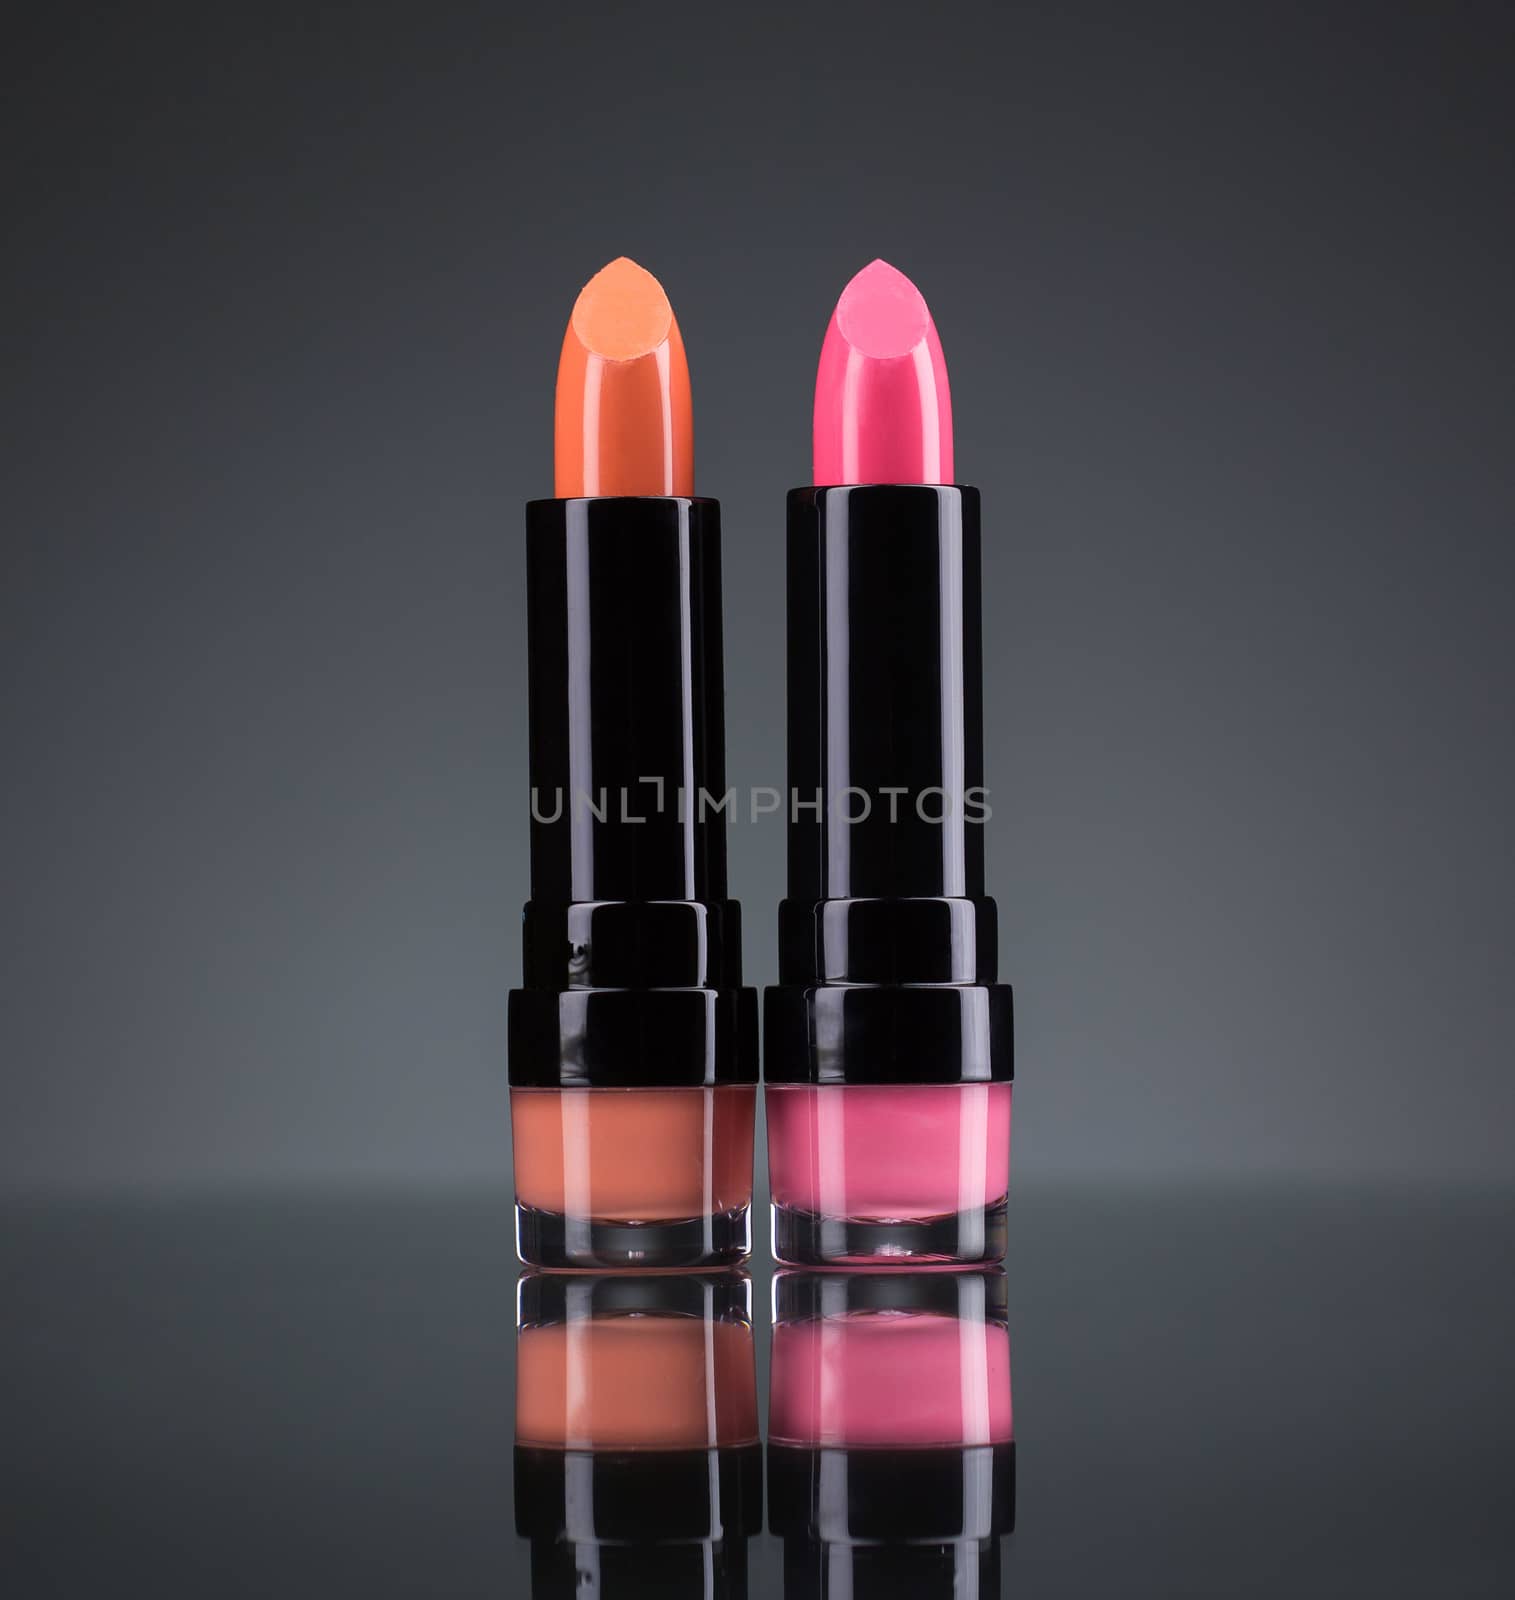 Two bright lipsticks on a black background